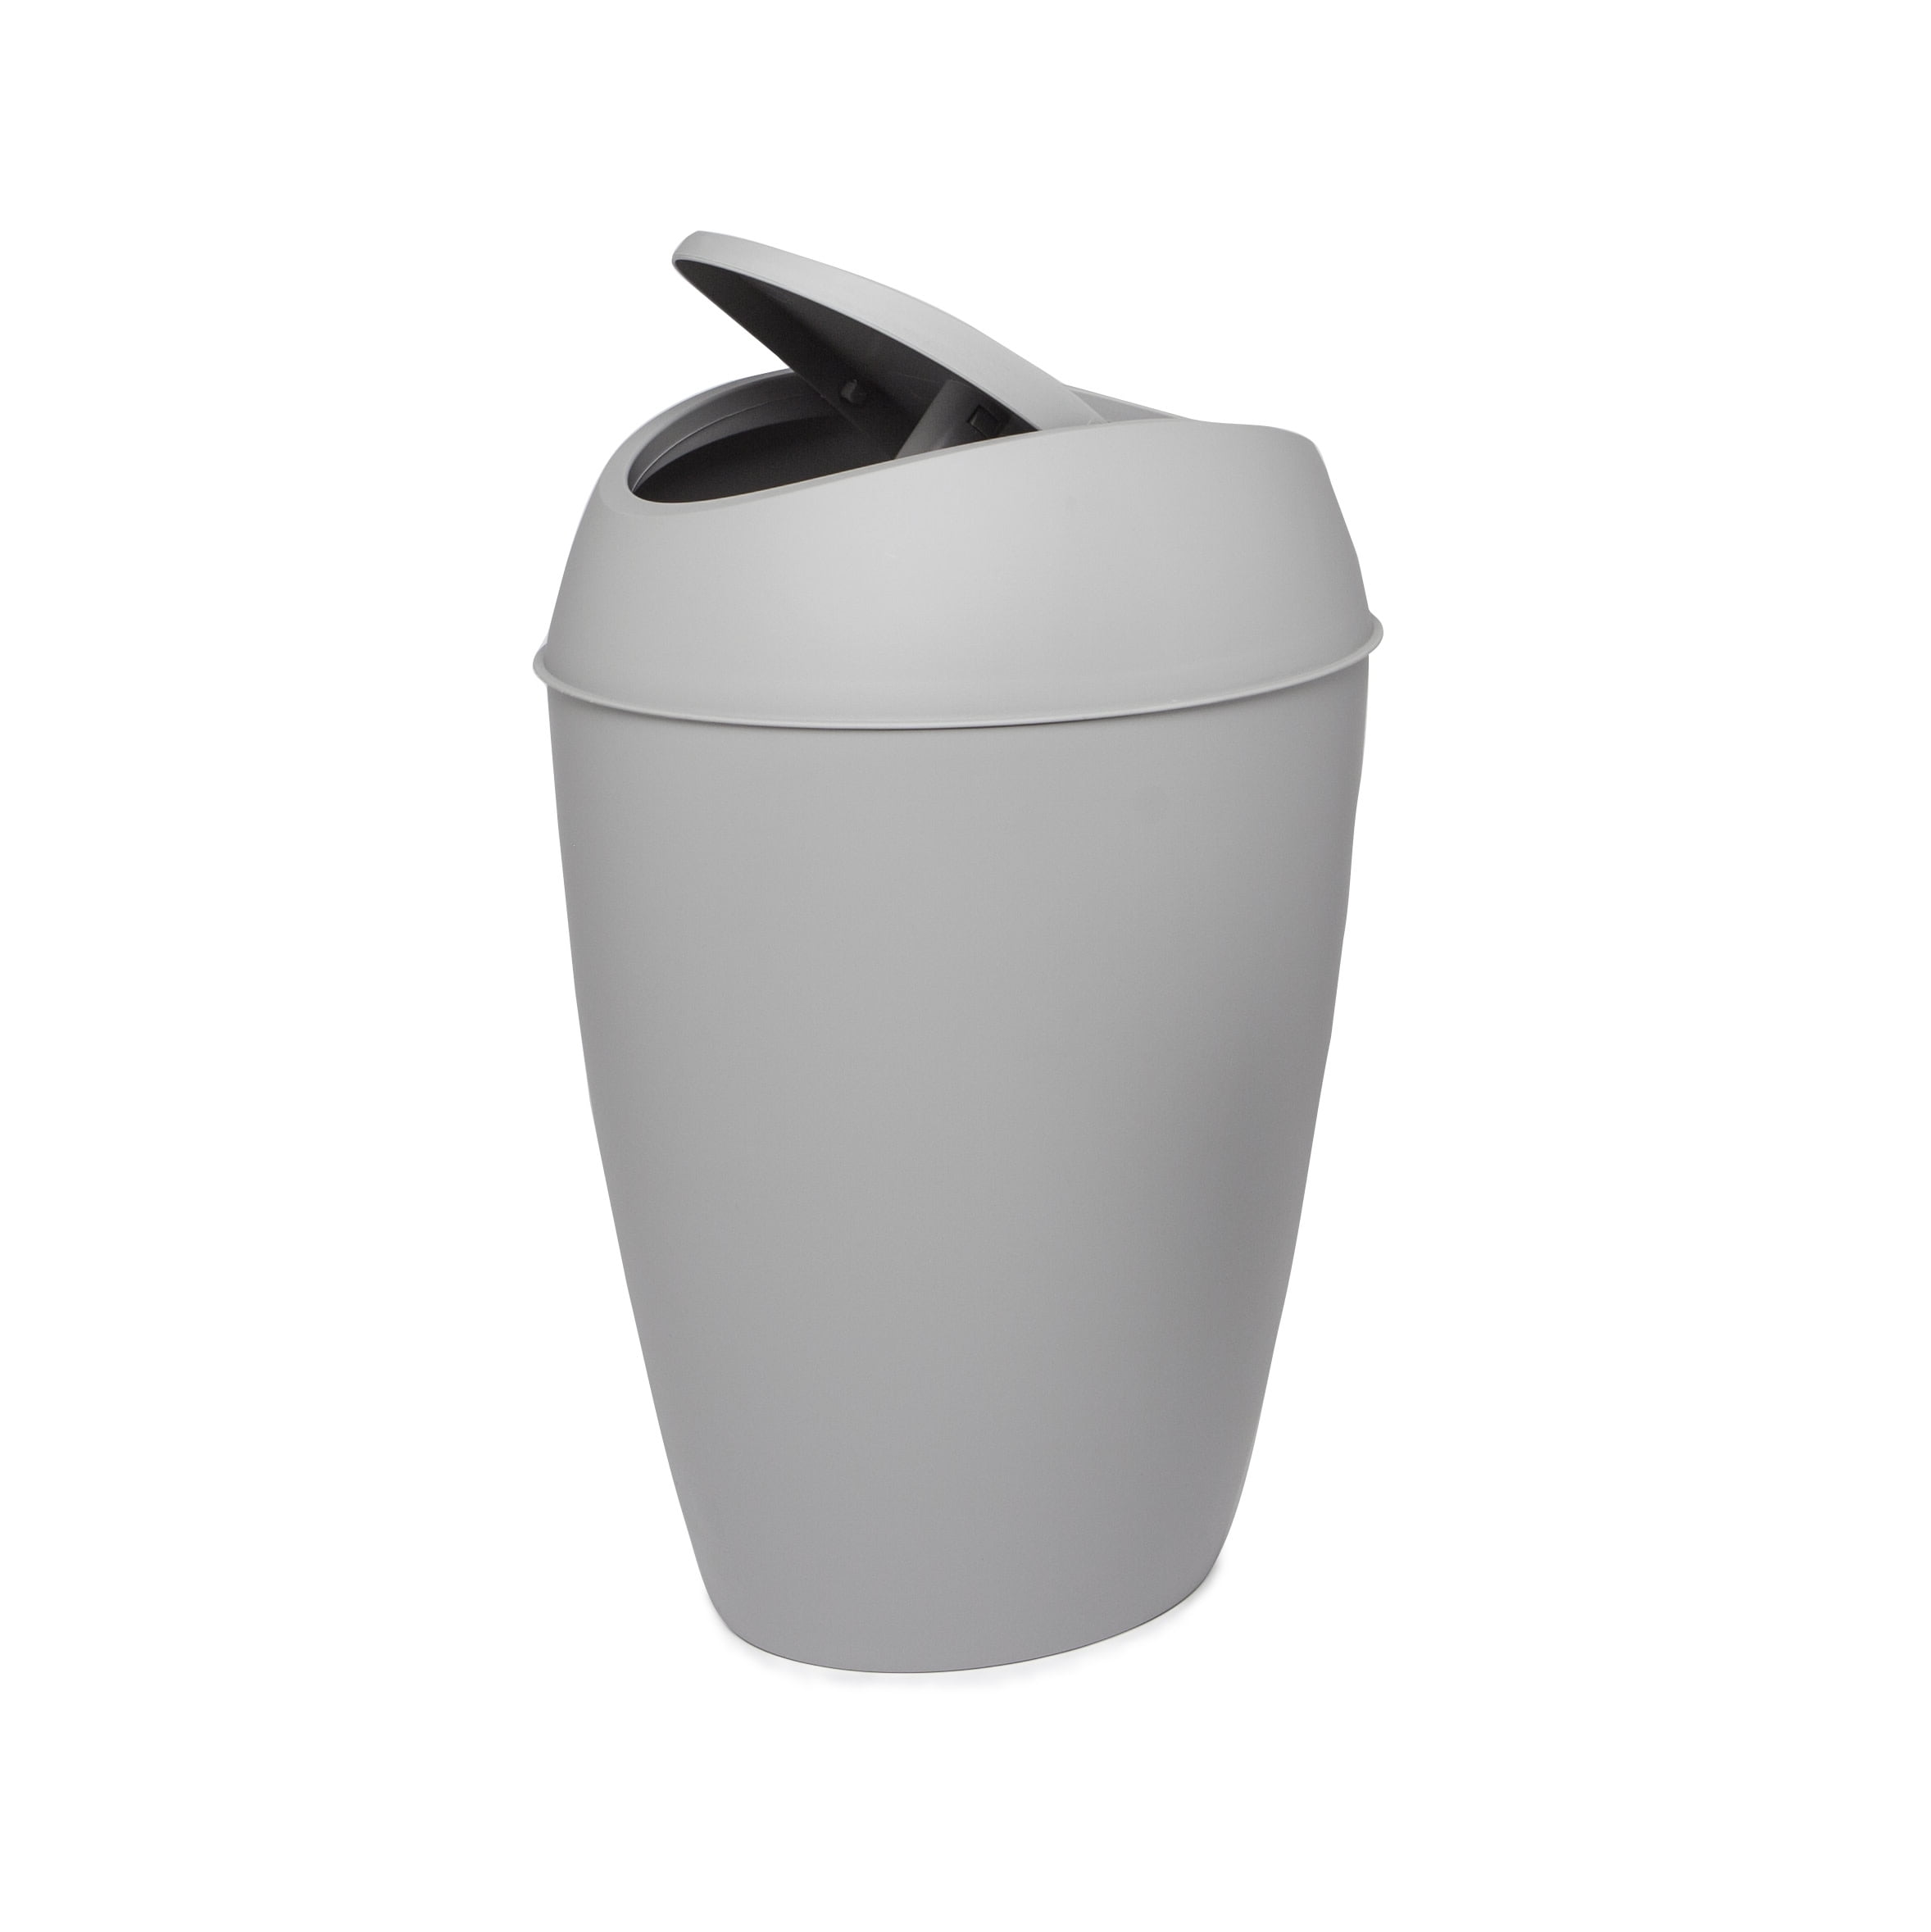 Gray FREE SHIPNG NEW Umbra Twirla 2.4 Gallon Trash Can with Swing-top Lid 